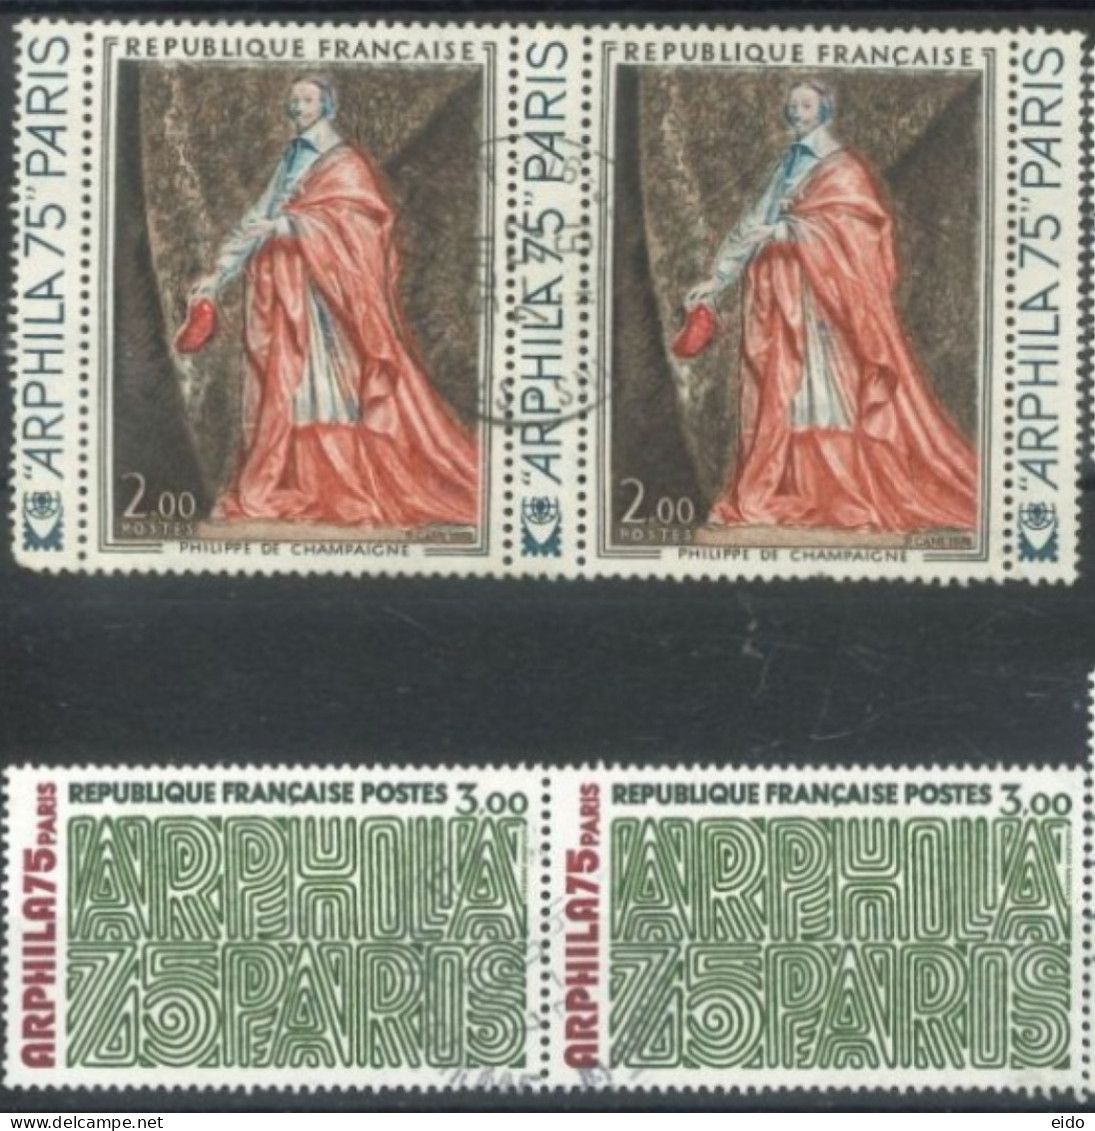 FRANCE - 1973/75, ARPHIL 75 PARIS STAMPS SET OF 2, E PAIR OF EACH, USED - Used Stamps